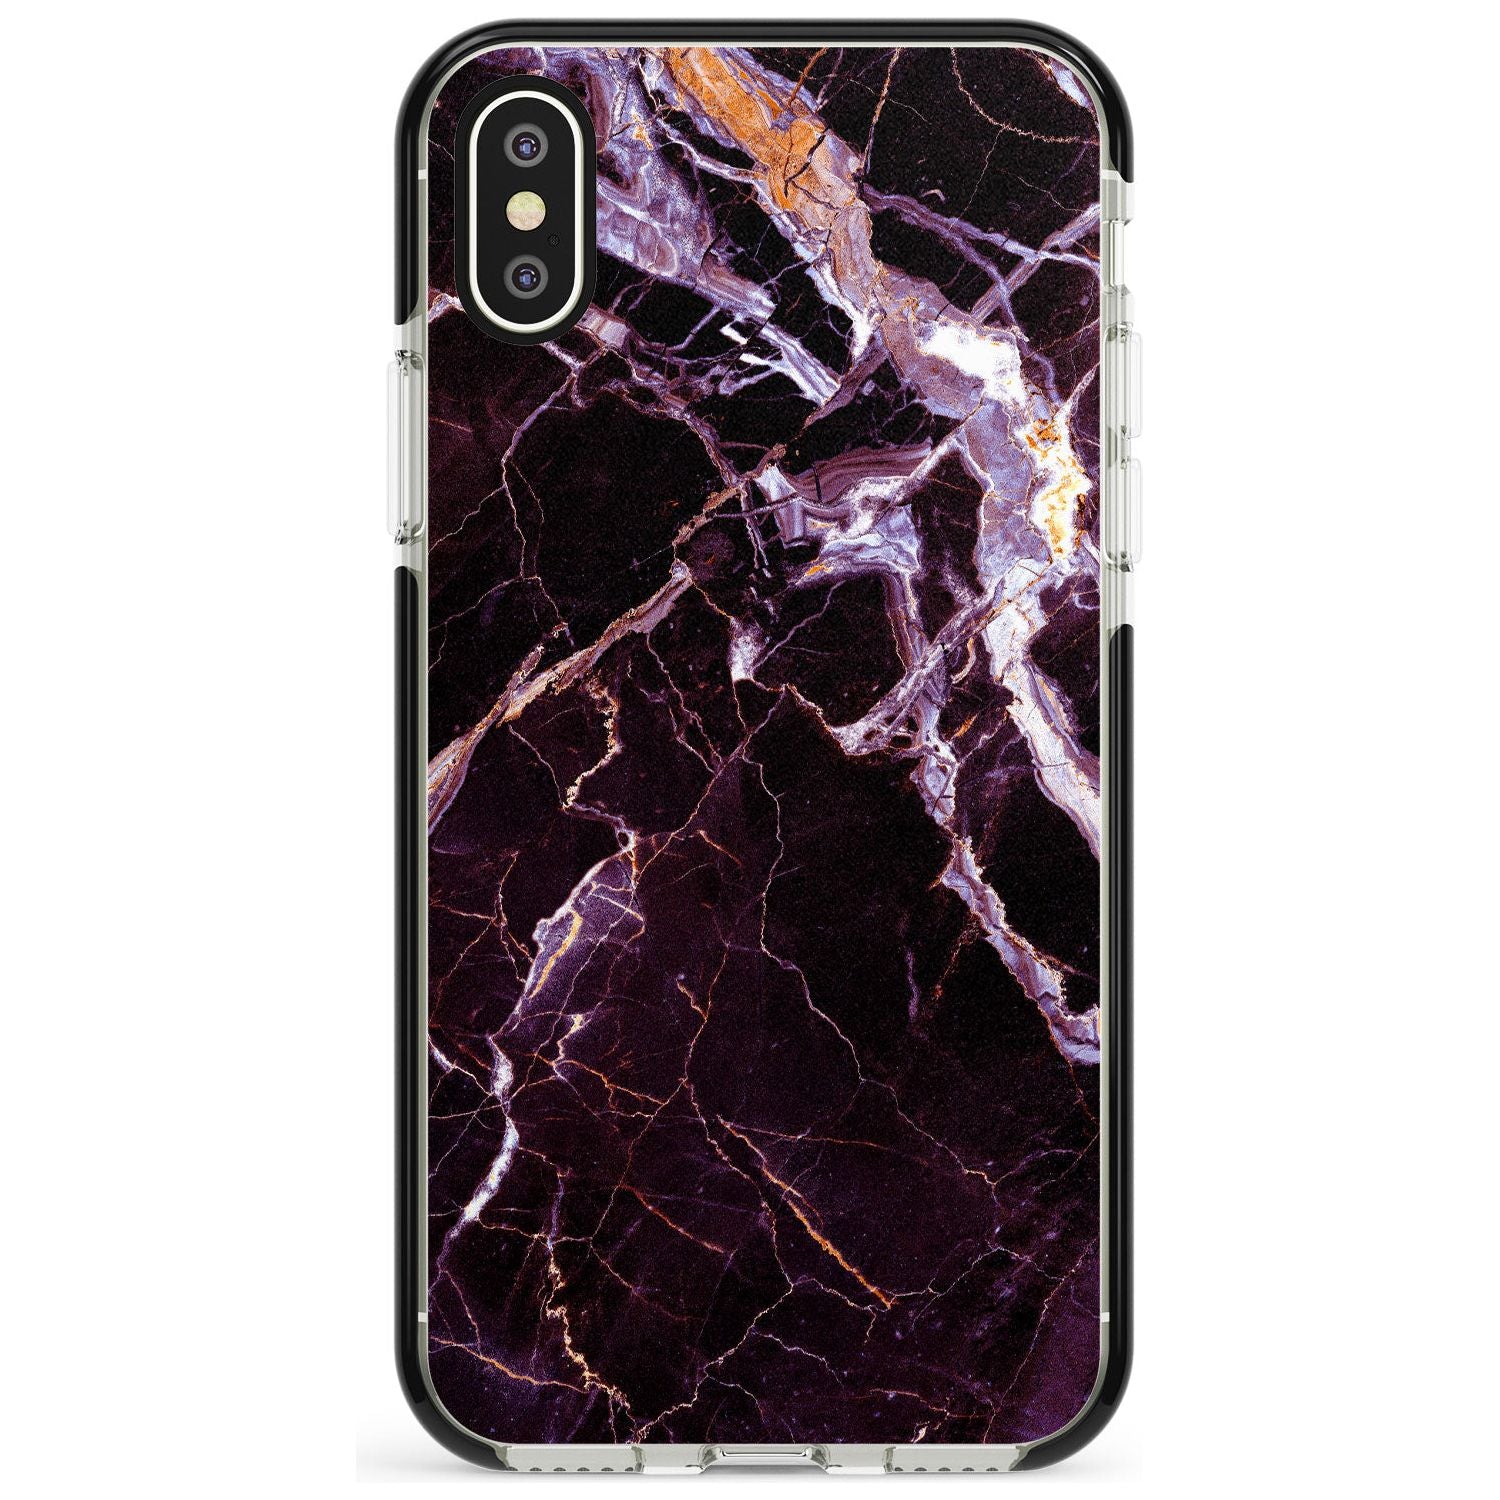 Black, Purple & Yellow shattered Marble Black Impact Phone Case for iPhone X XS Max XR